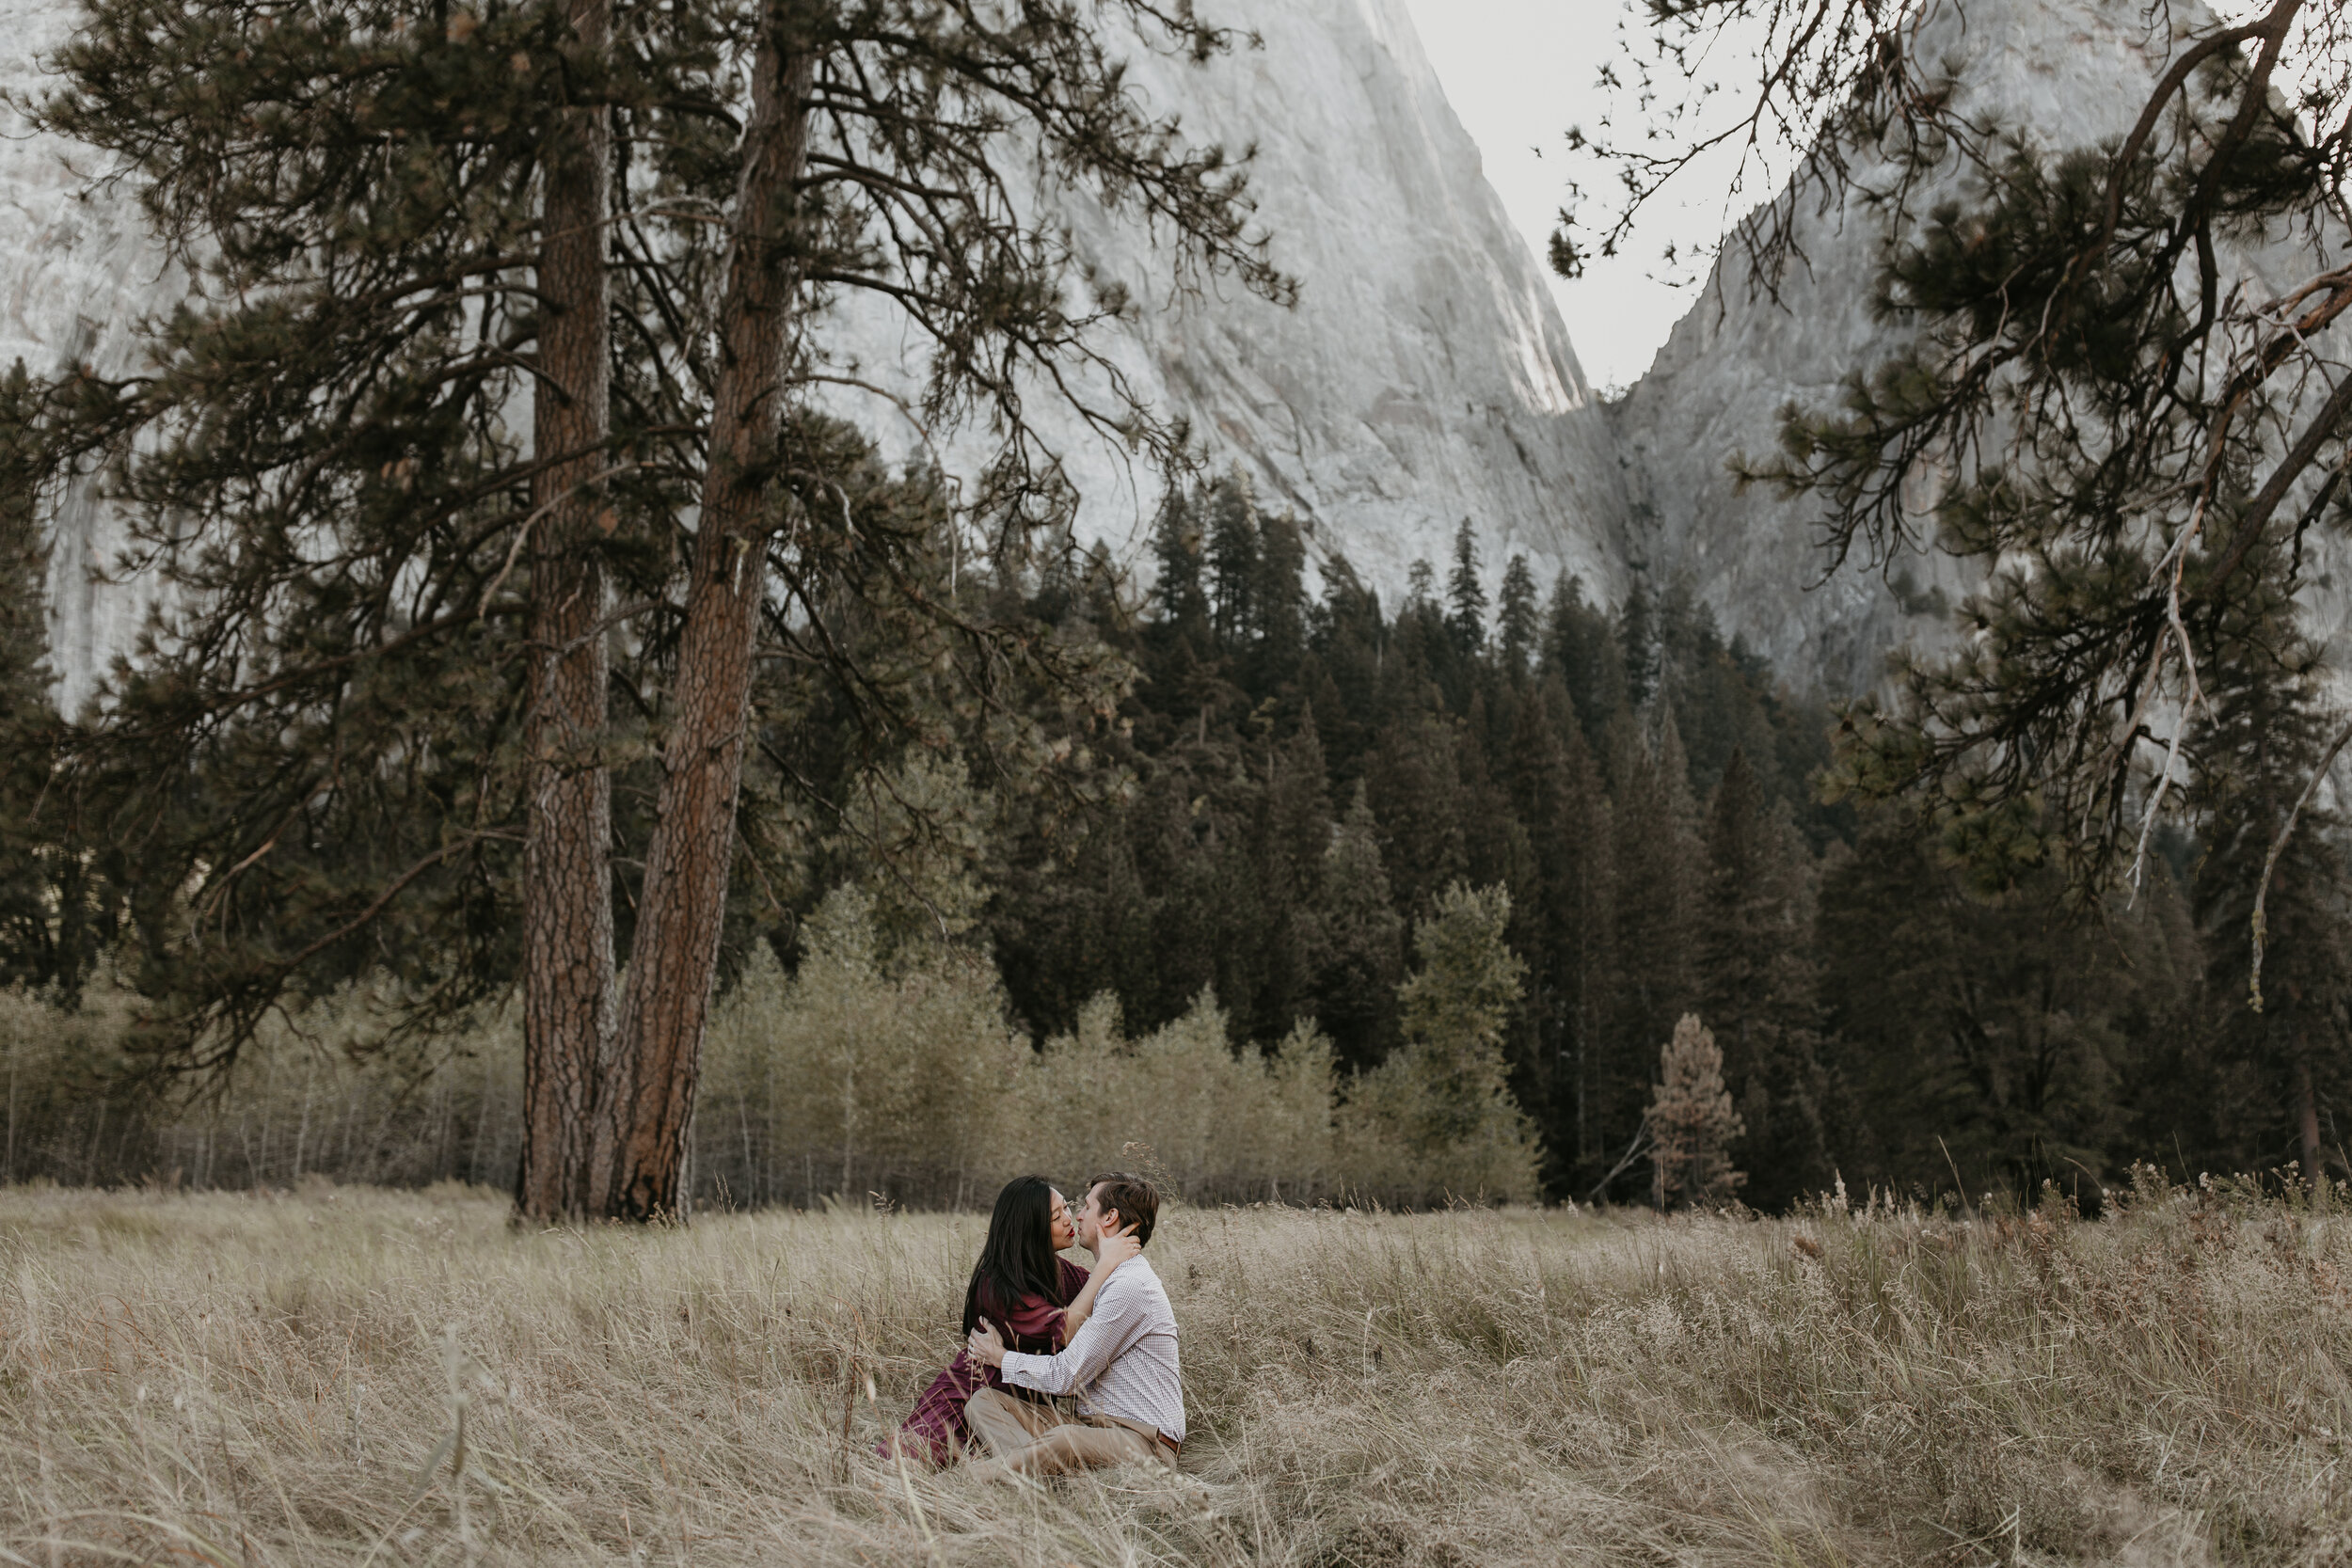 yosemite-national-park-couples-session-at-taft-point-and-yosemite-valley-yosemite-elopement-photographer-nicole-daacke-photography-108.jpg